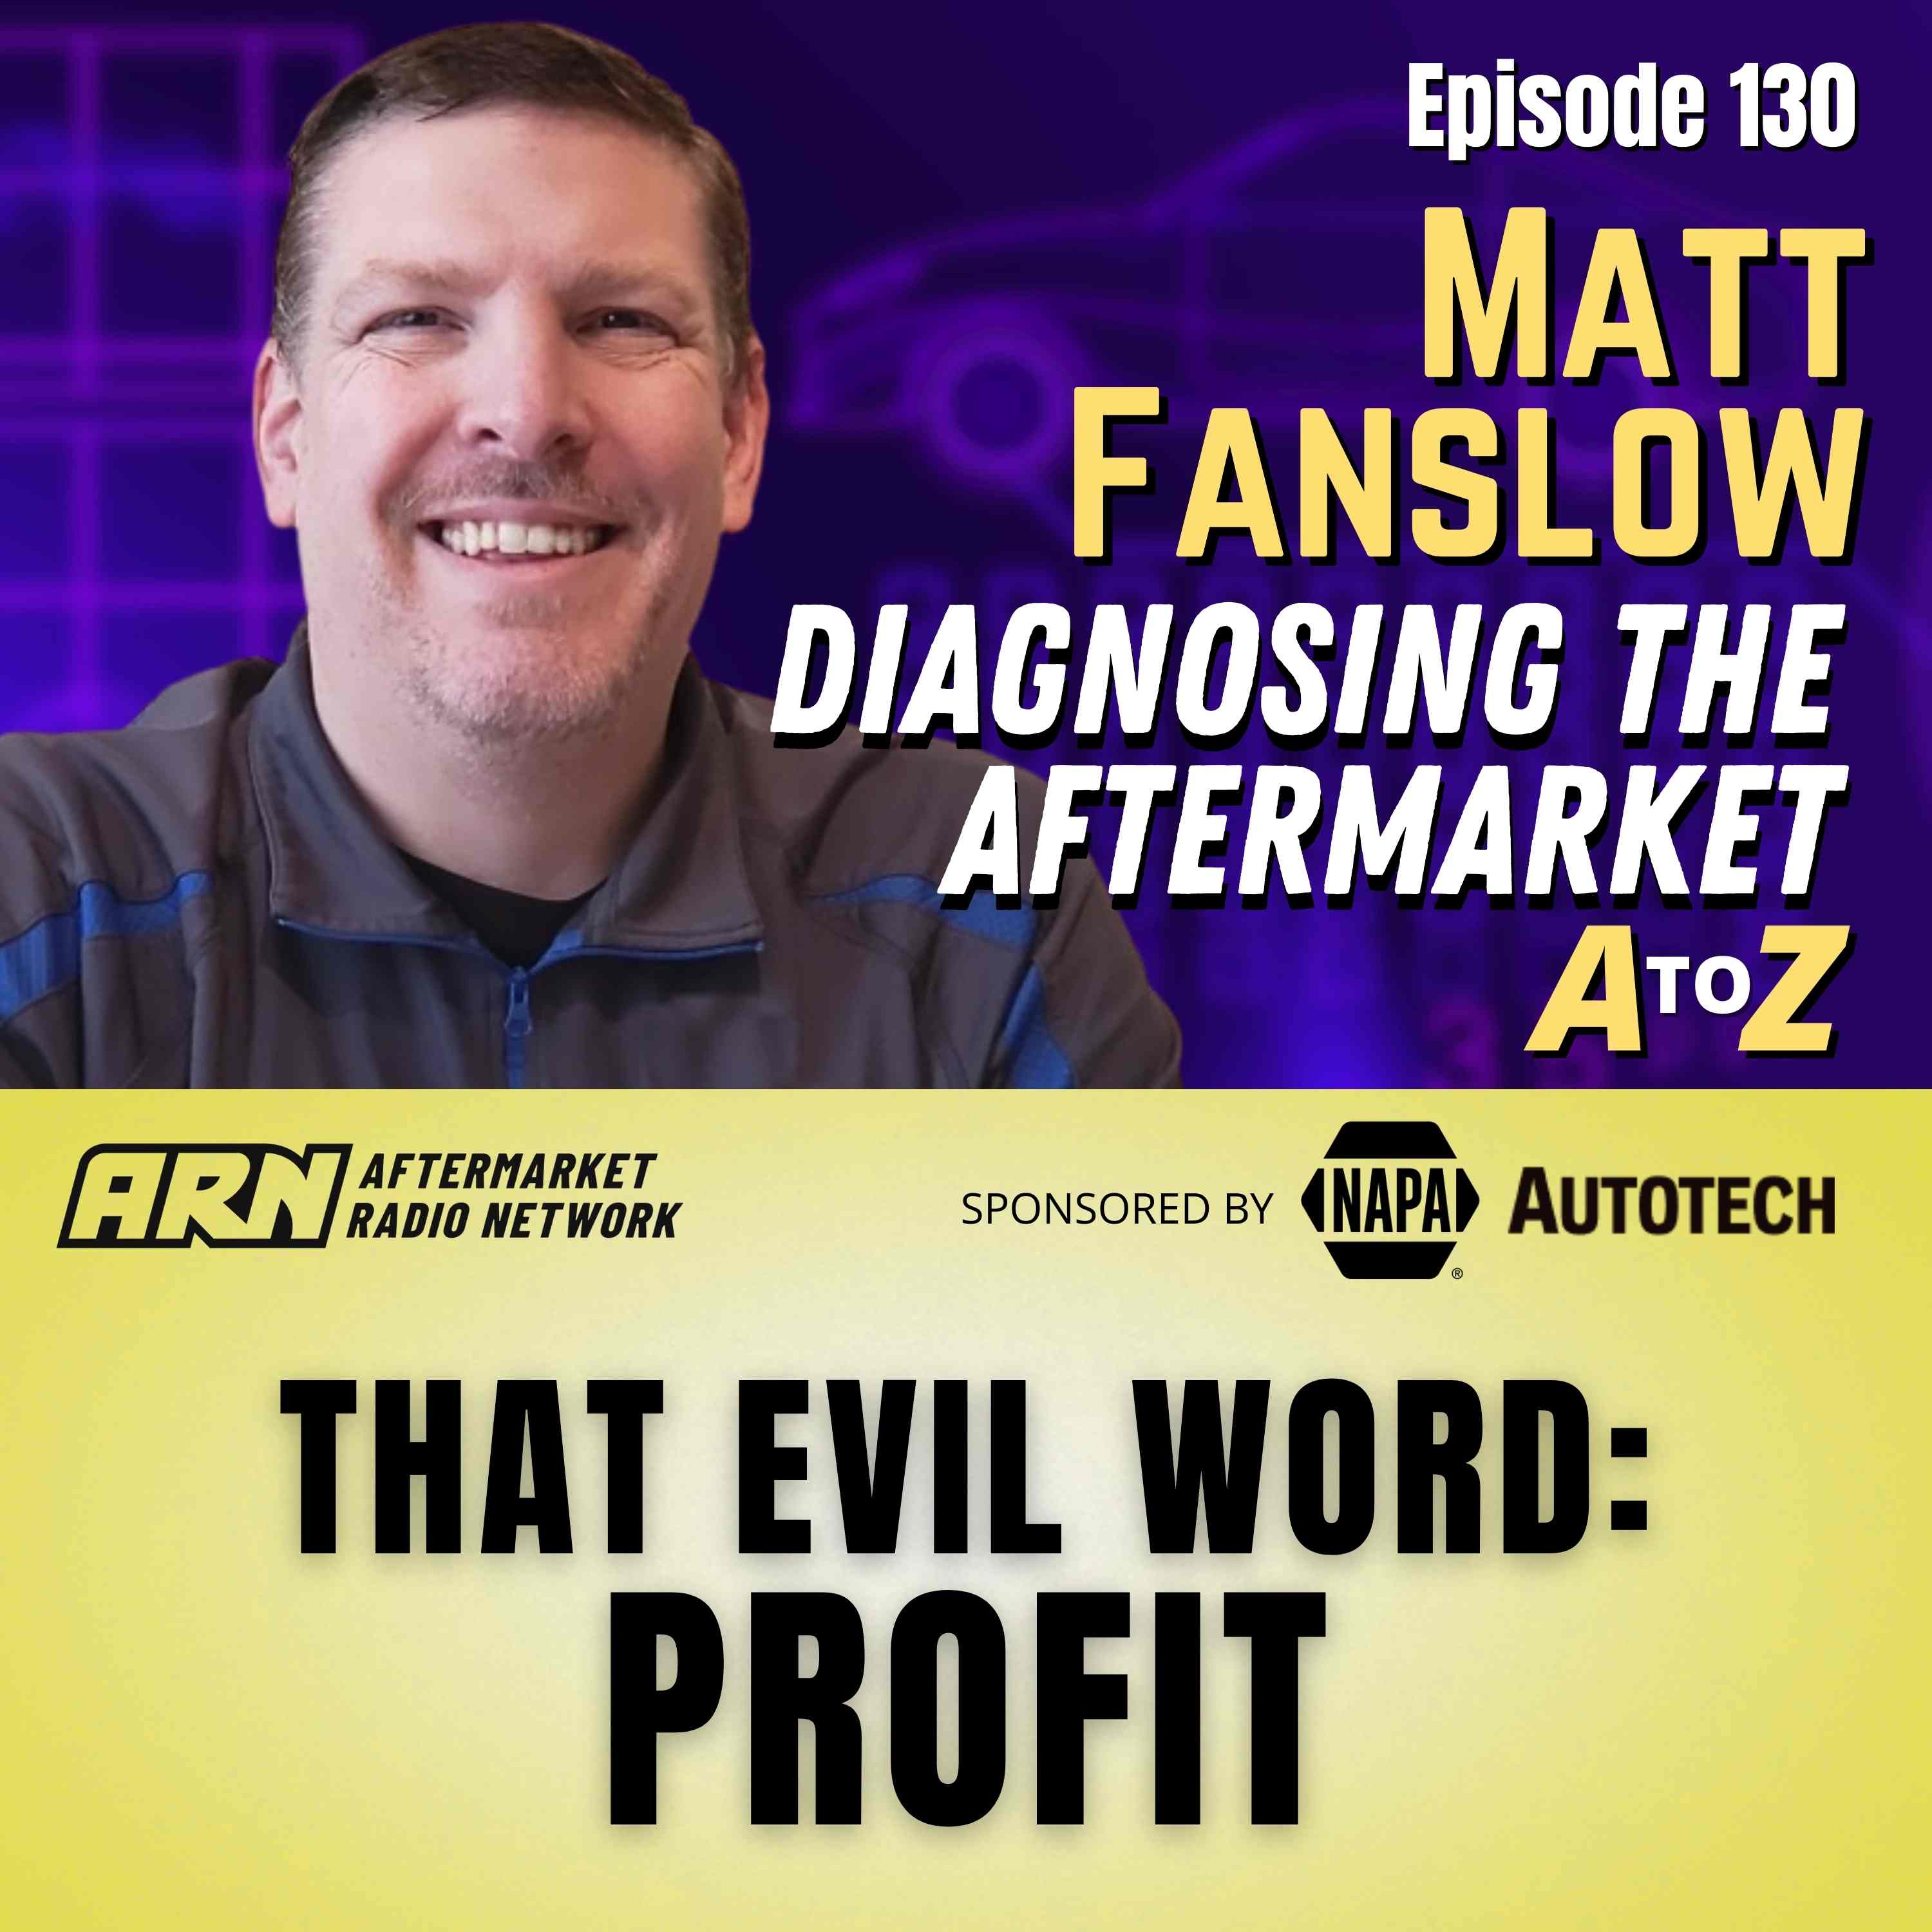 That EVIL Word: Profit [E130] - Diagnosing the Aftermarket A to Z